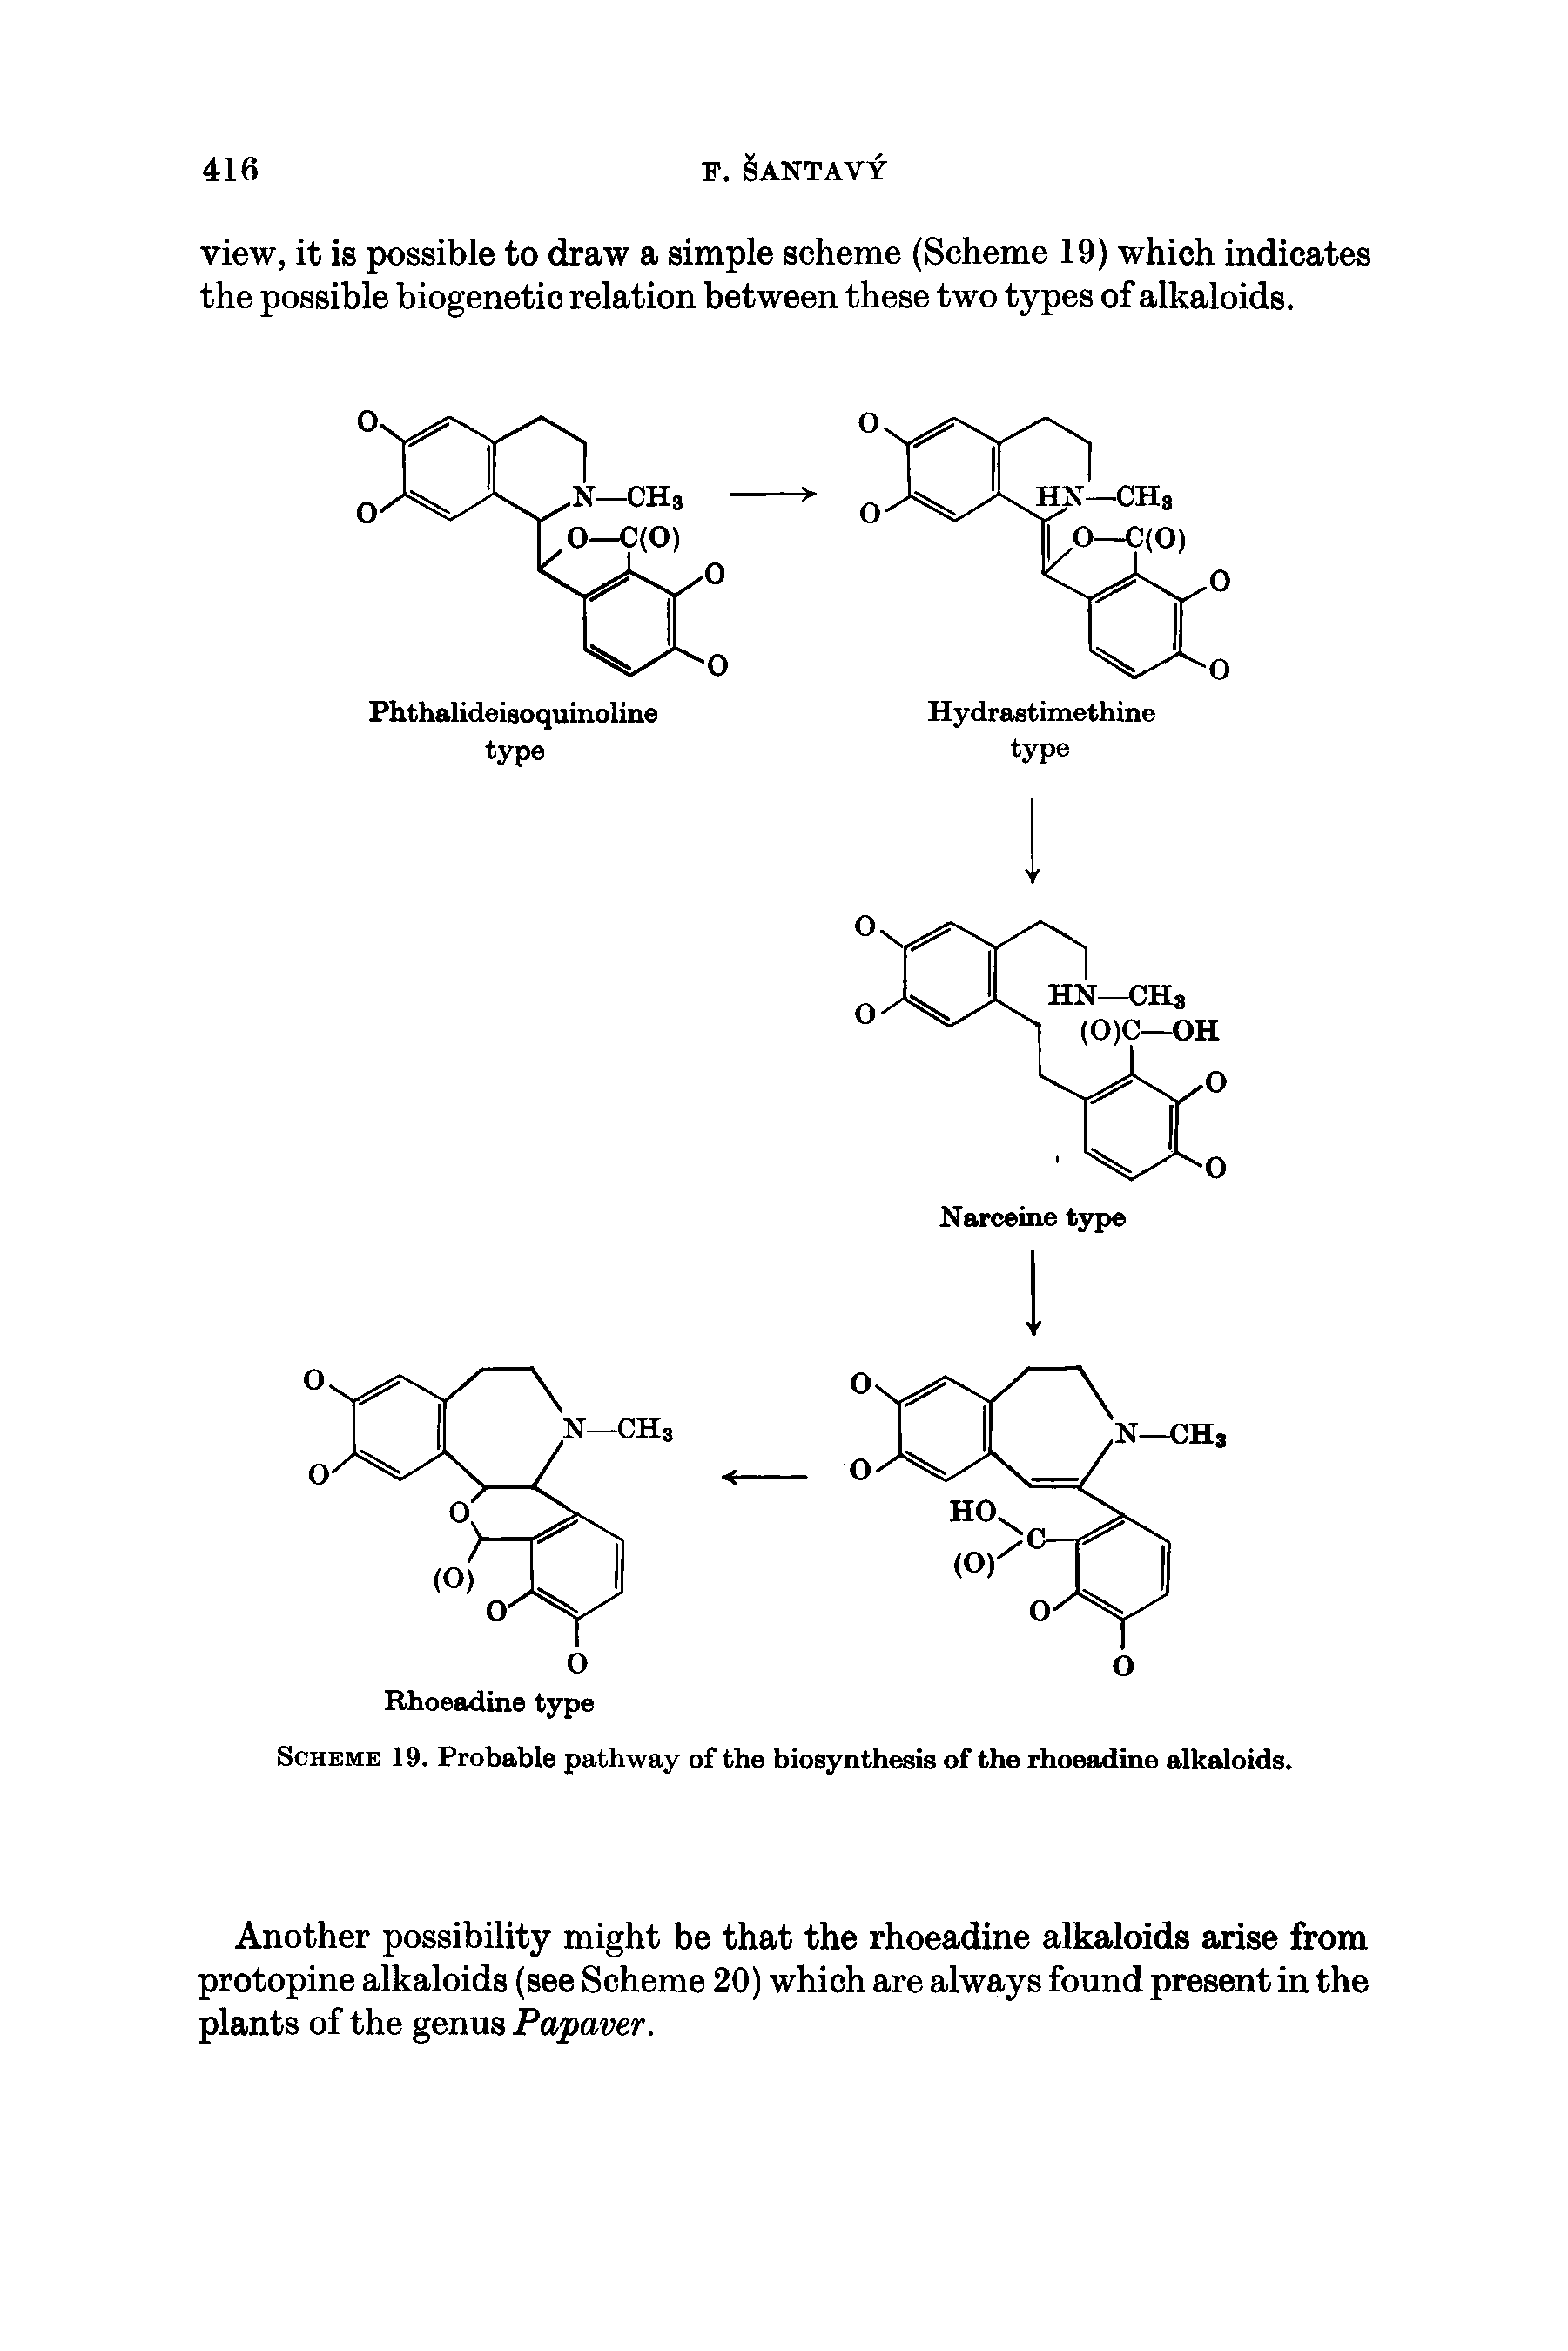 Scheme 19. Probable pathway of the biosynthesis of the rhoeadine alkaloids.